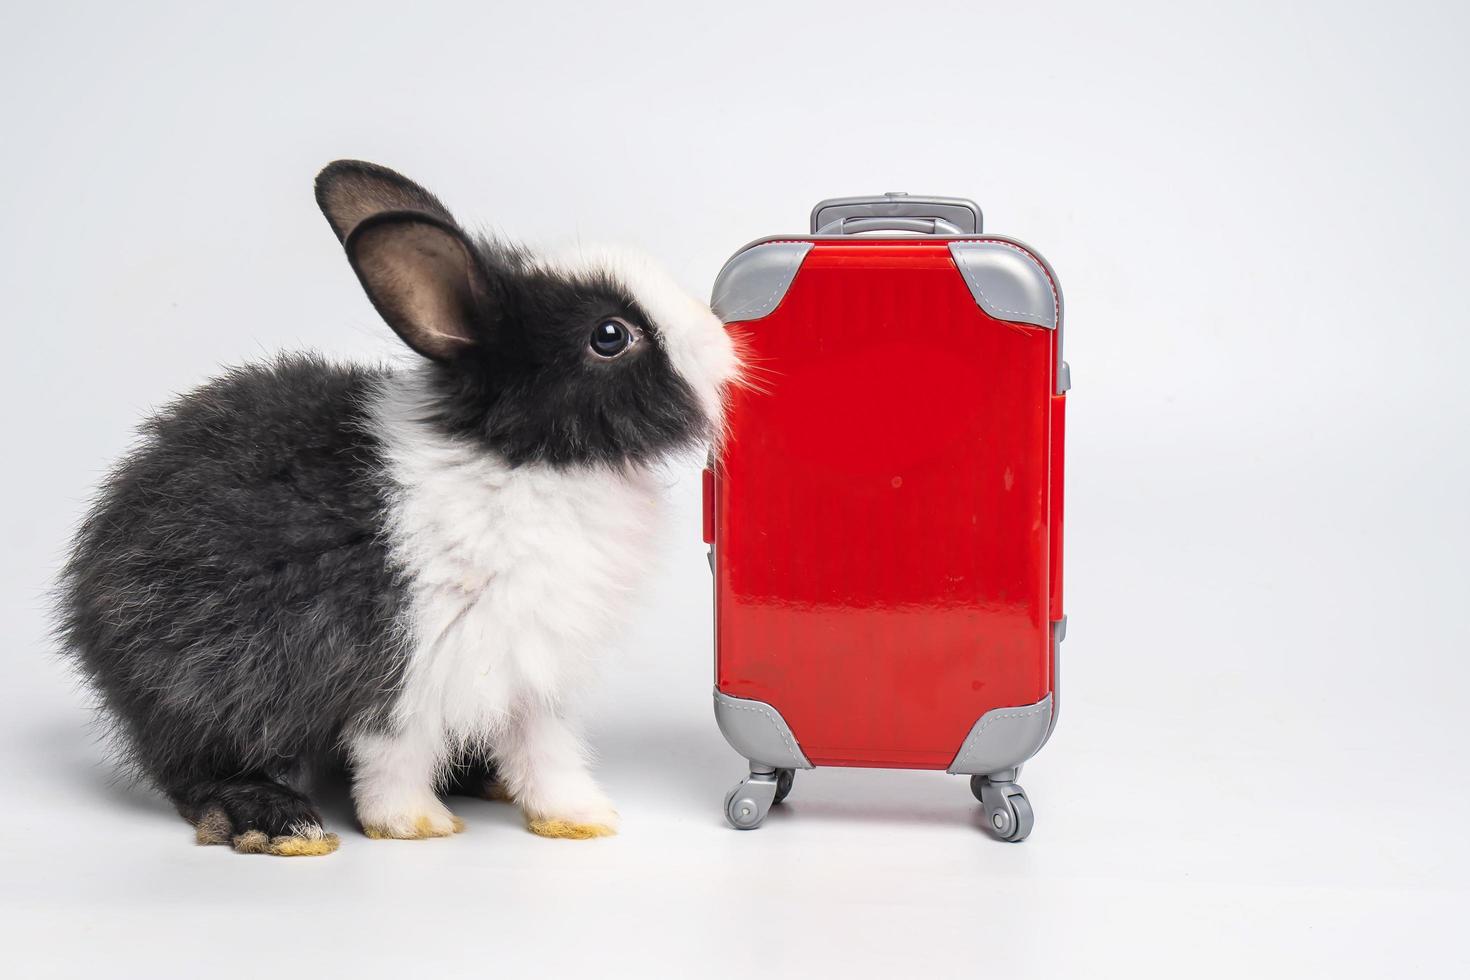 A small adorable black white bunny or rabbit traveler with red luggage with airplane, going on vacation. Travel concept on white background. photo